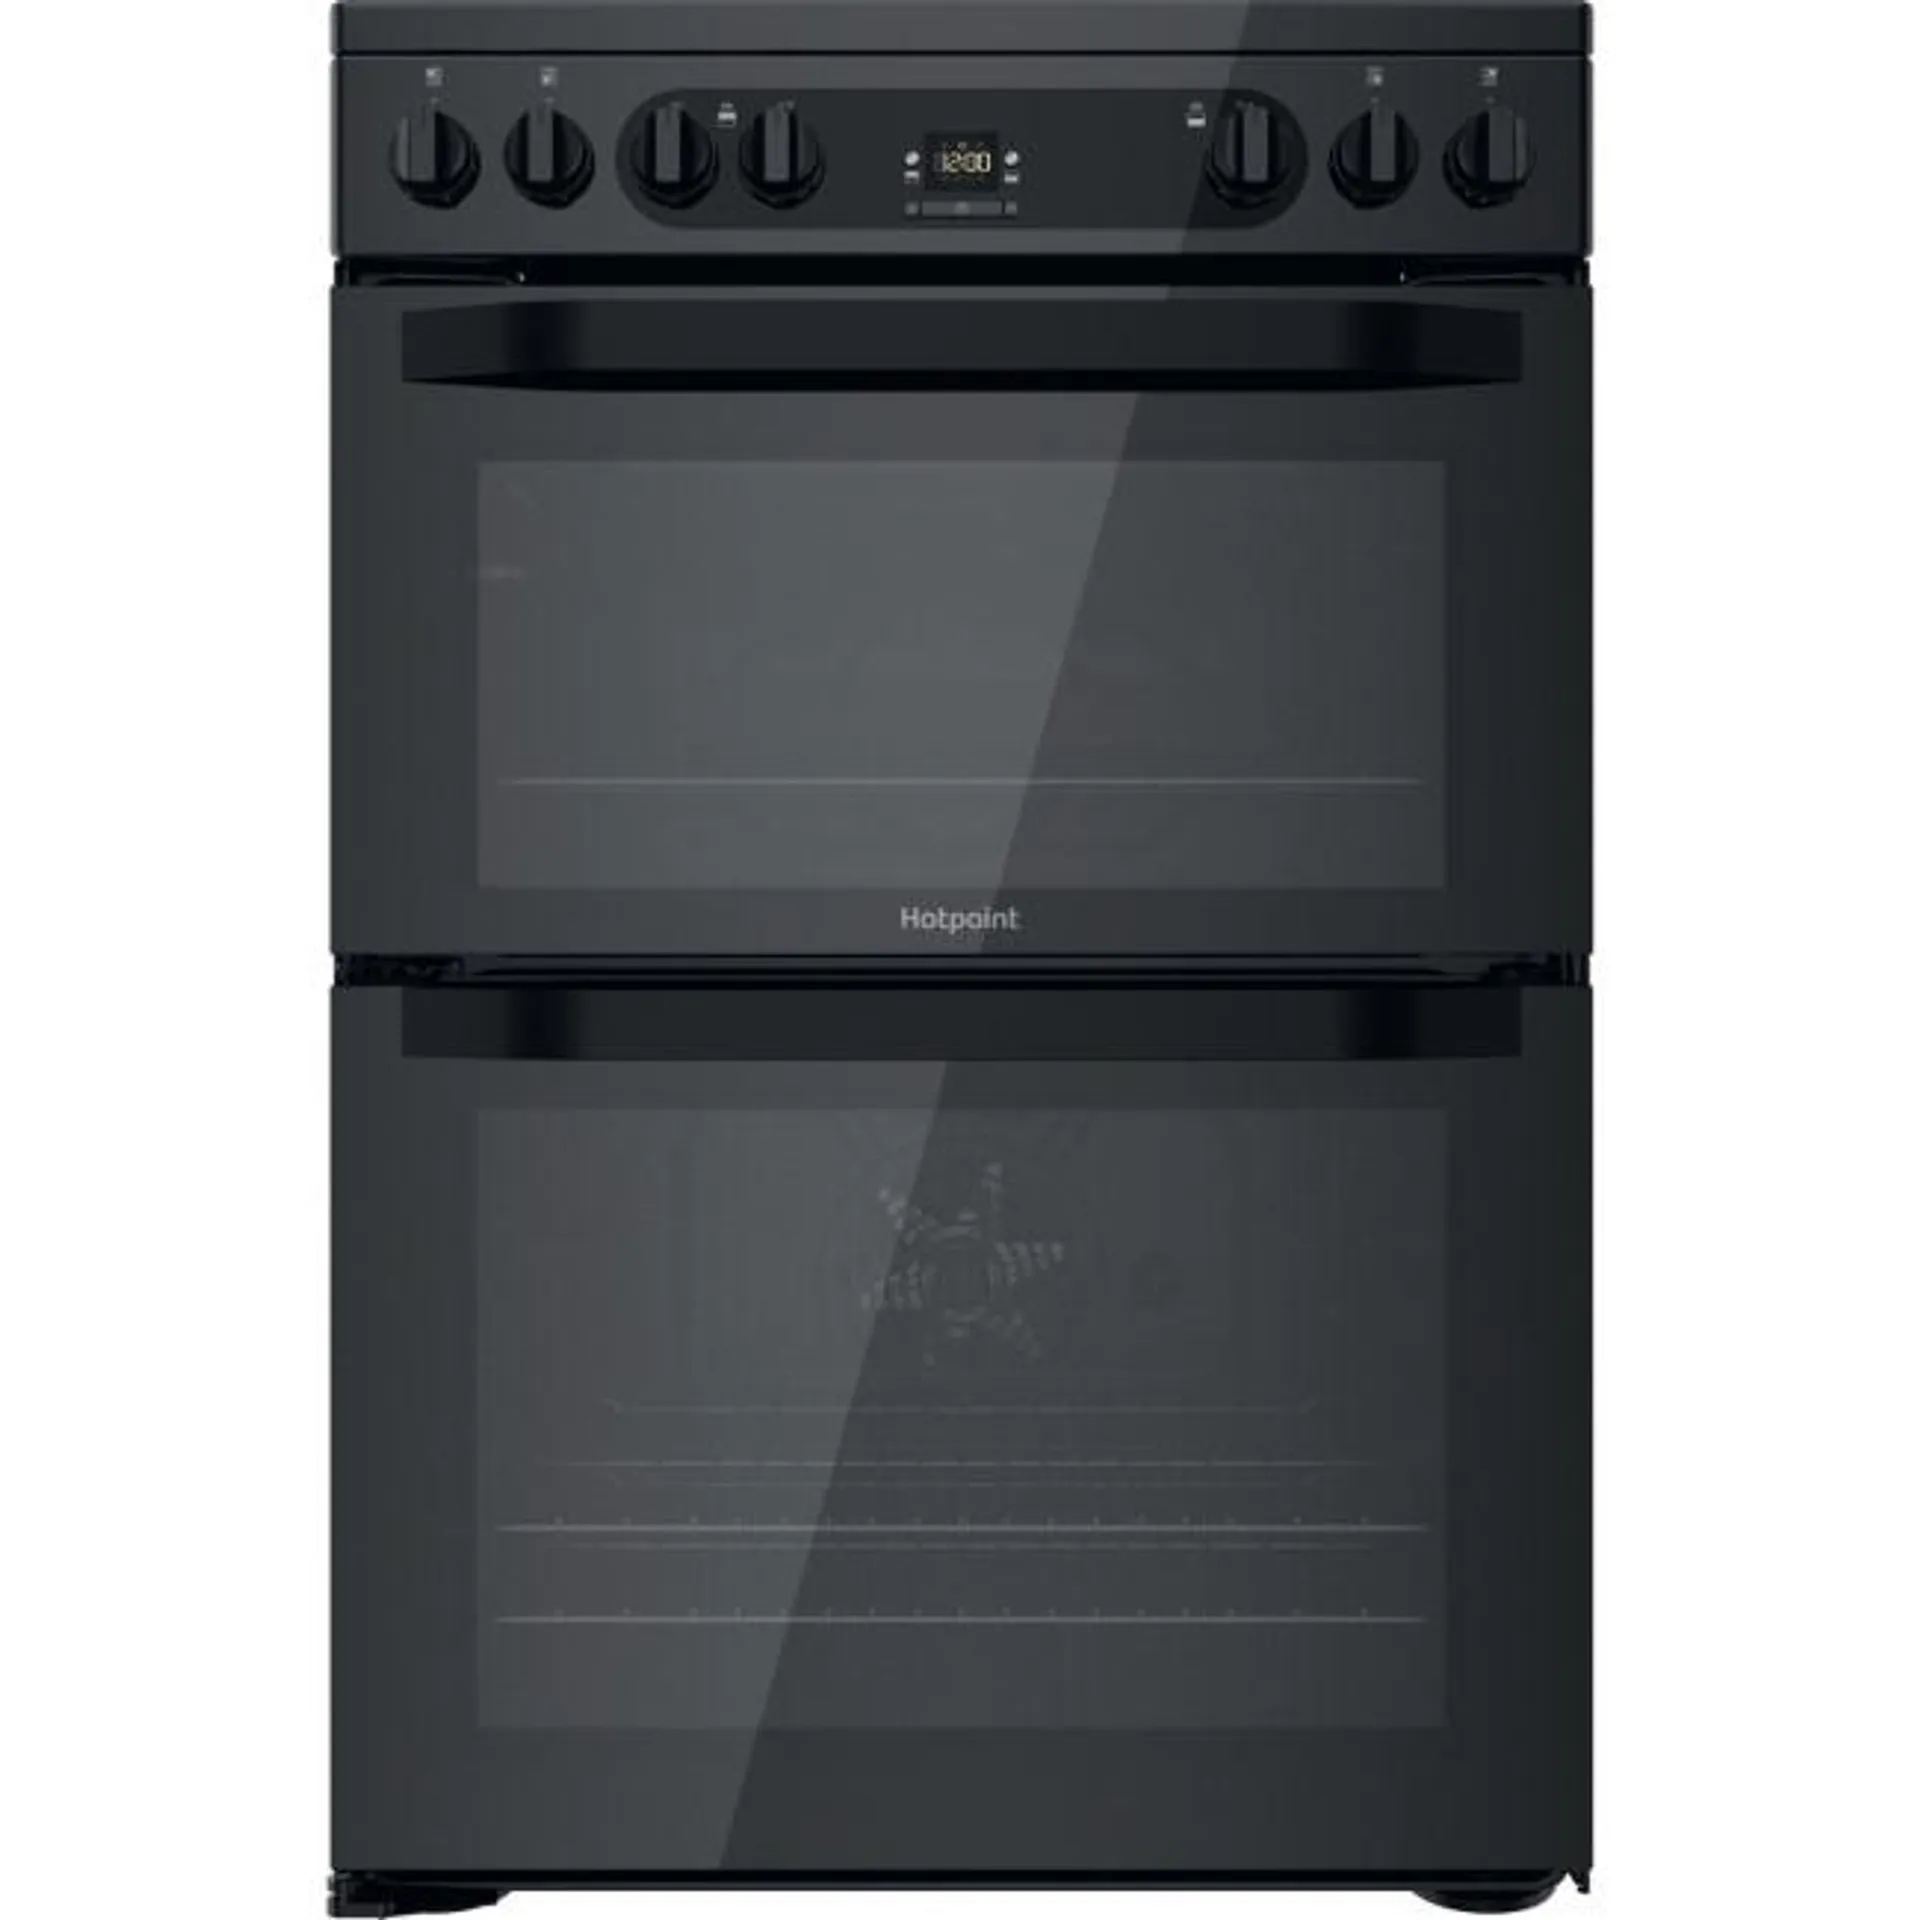 Hotpoint 60cm Double Oven Electric Cooker with Catalytic Cleaning - Black